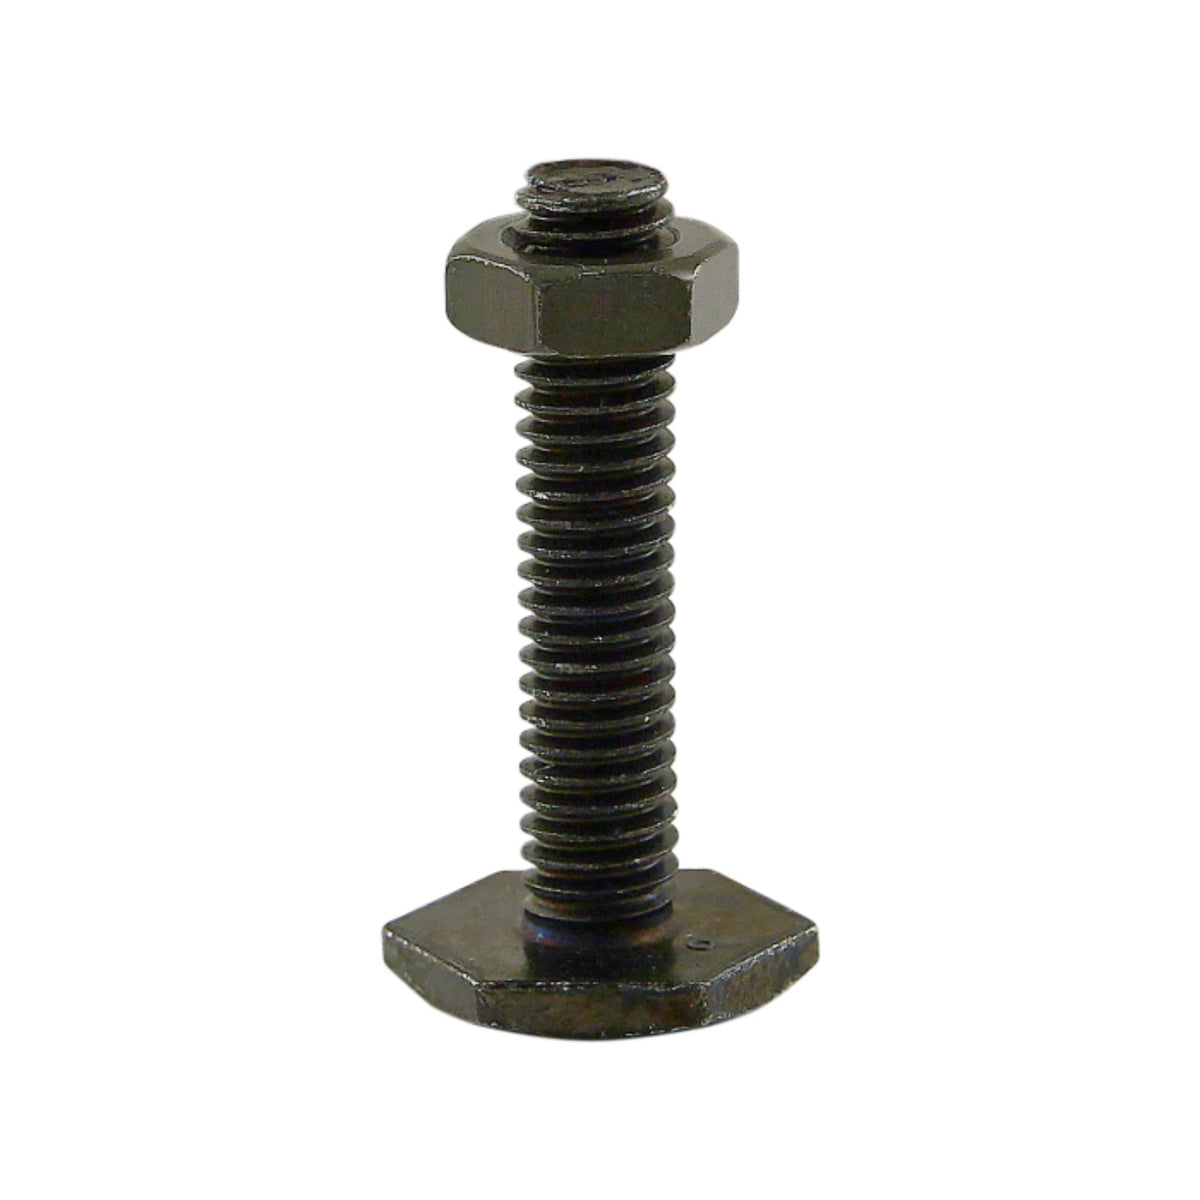 black metal piece with a hexagon base, a long threaded stem pointing upward with a nut at the top of the thread